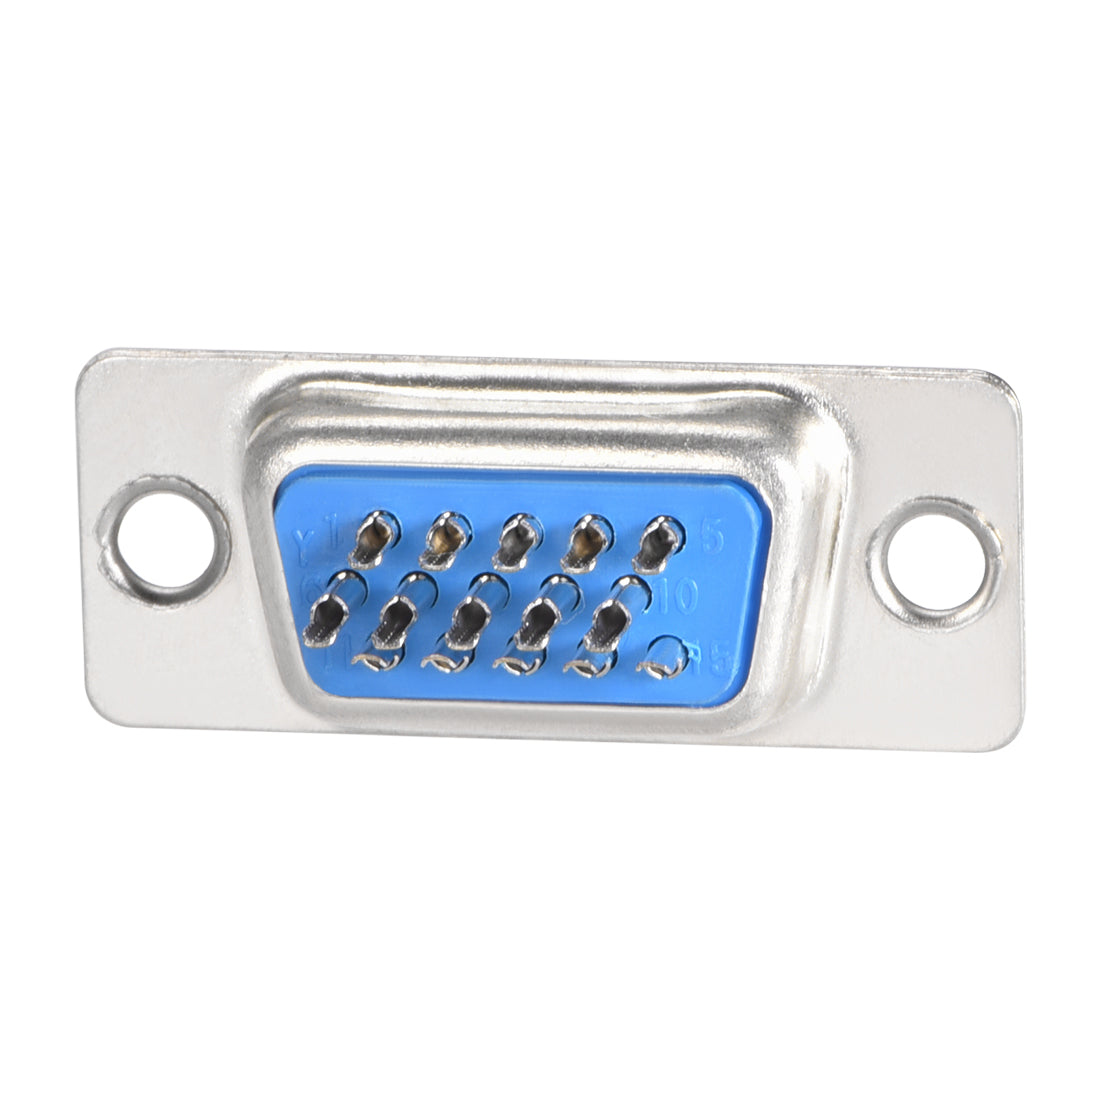 uxcell Uxcell D-sub Connector Female Socket 15-pin 3-row Port Terminal Breakout for Mechanical Equipment CNC Computers 5pcs